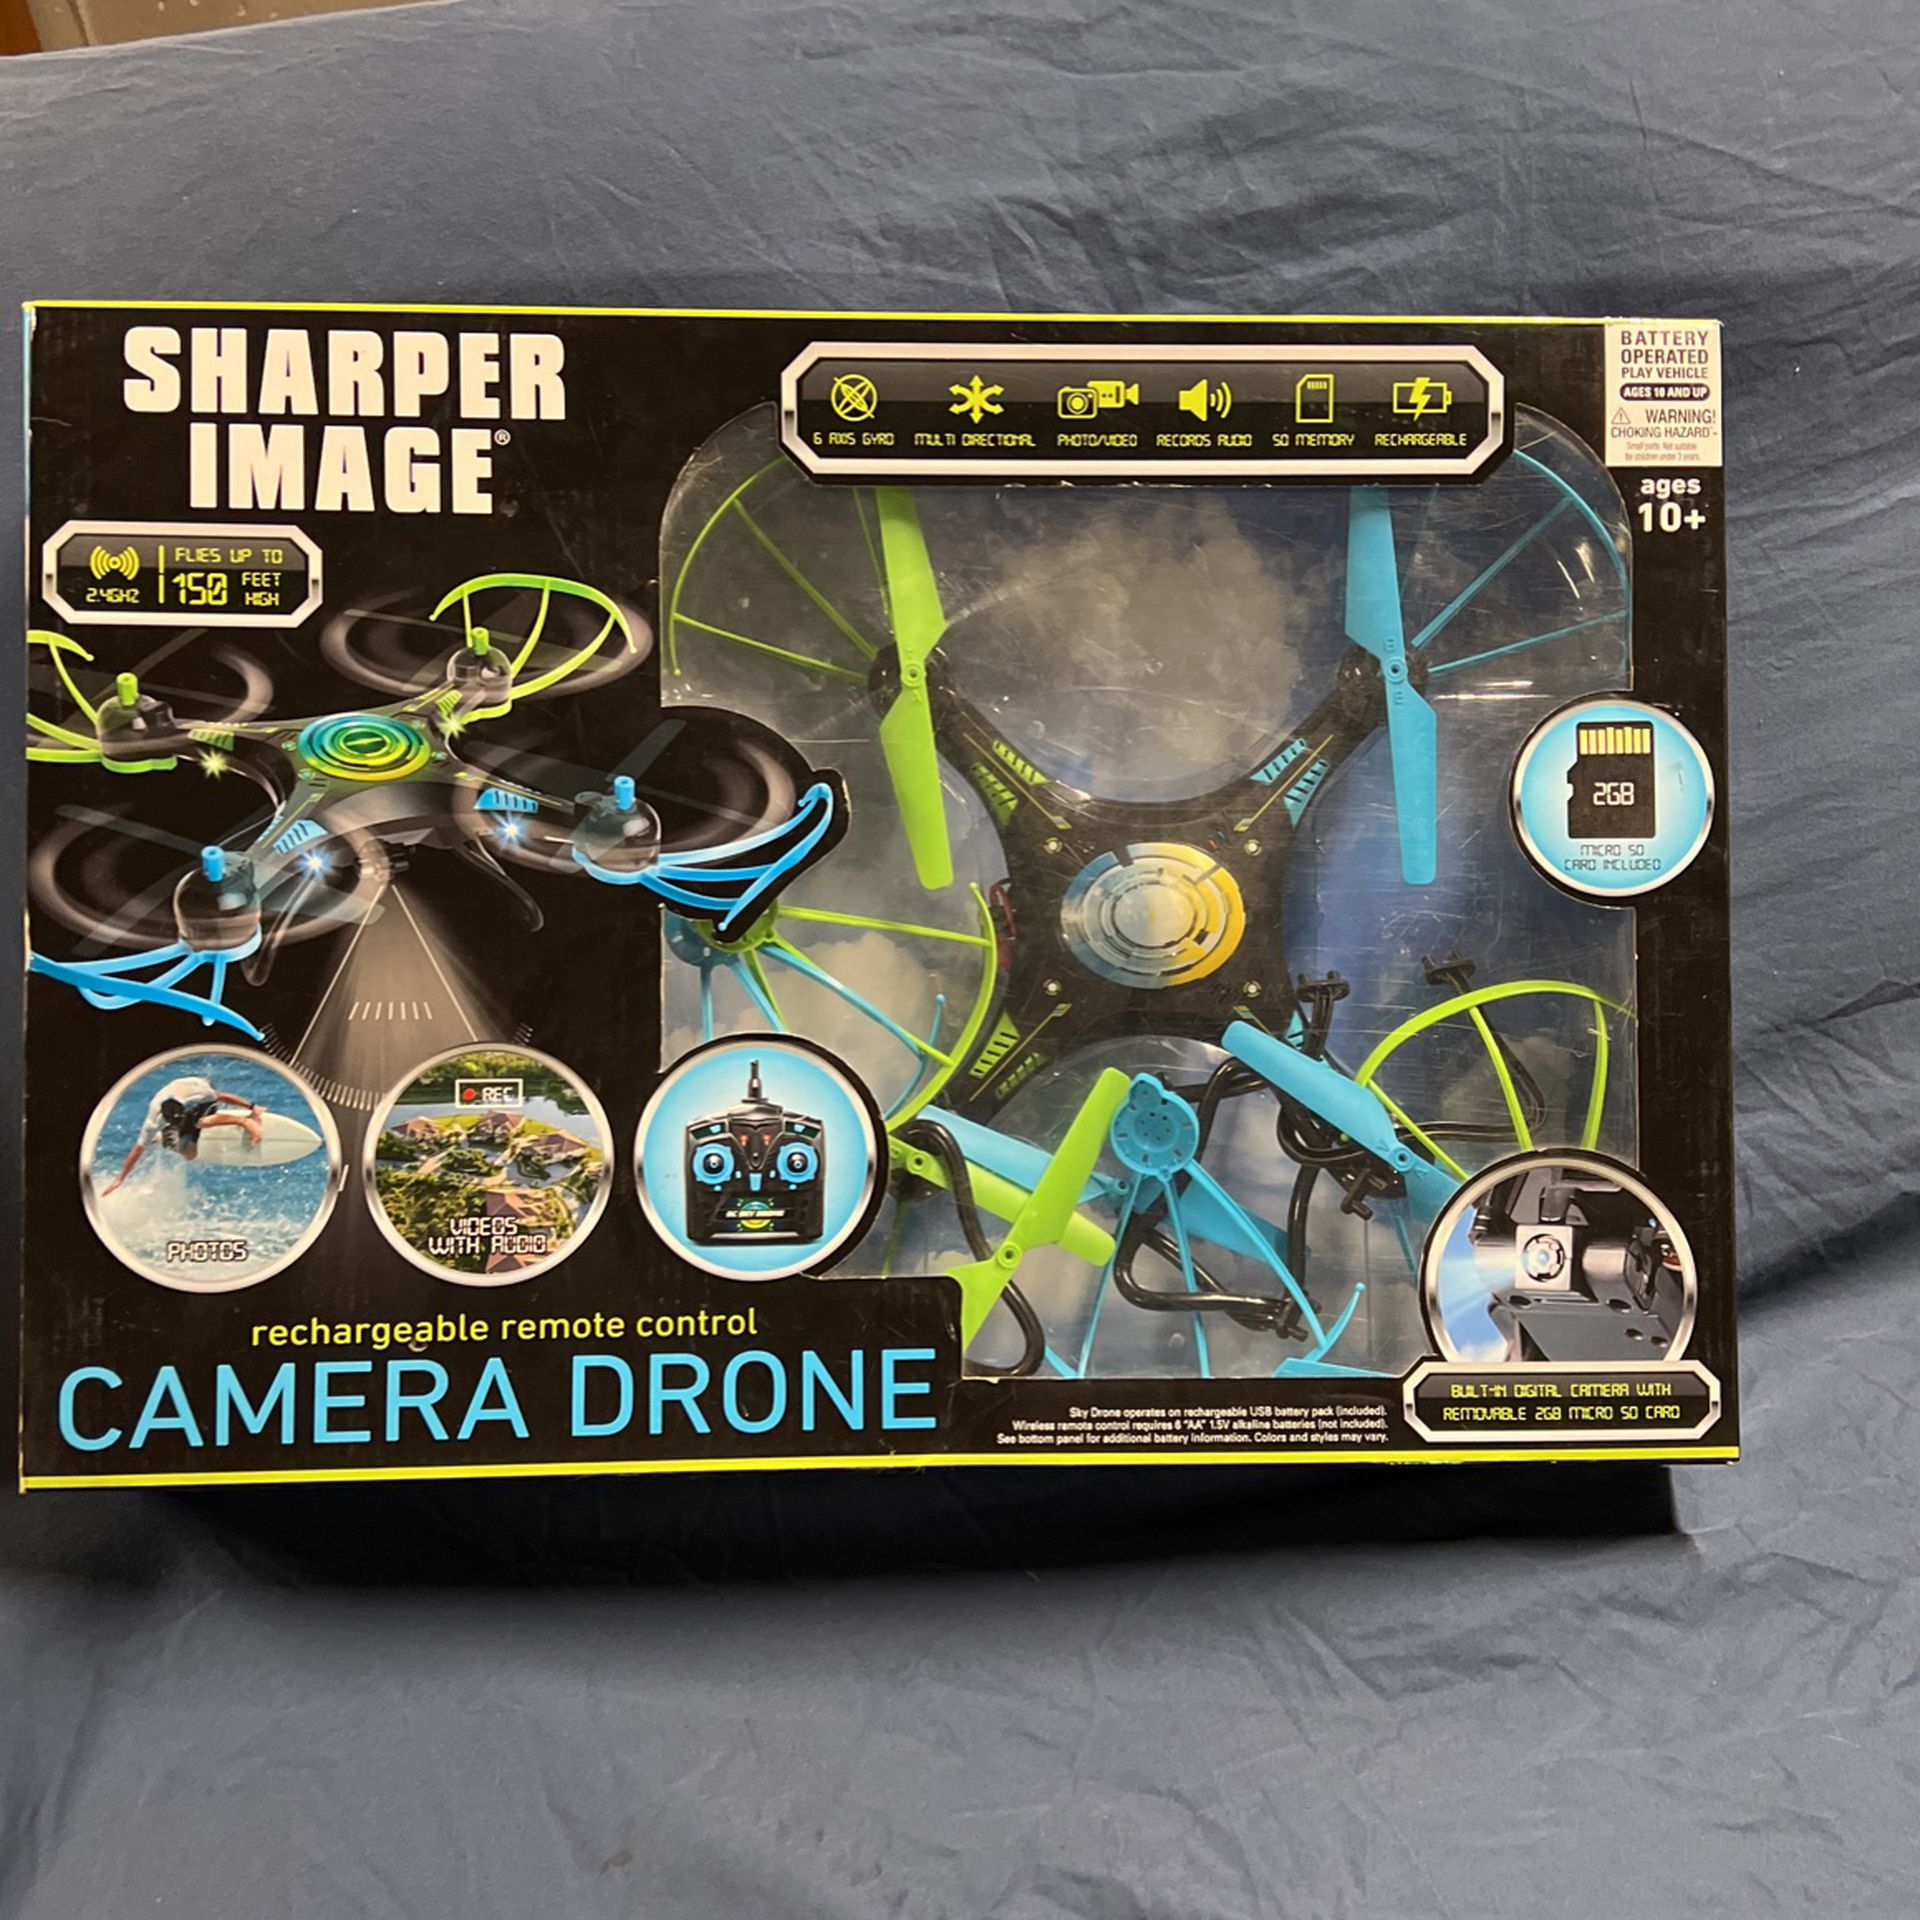 Sharper Image, Camera Drone, Rechargeable, Remote Control